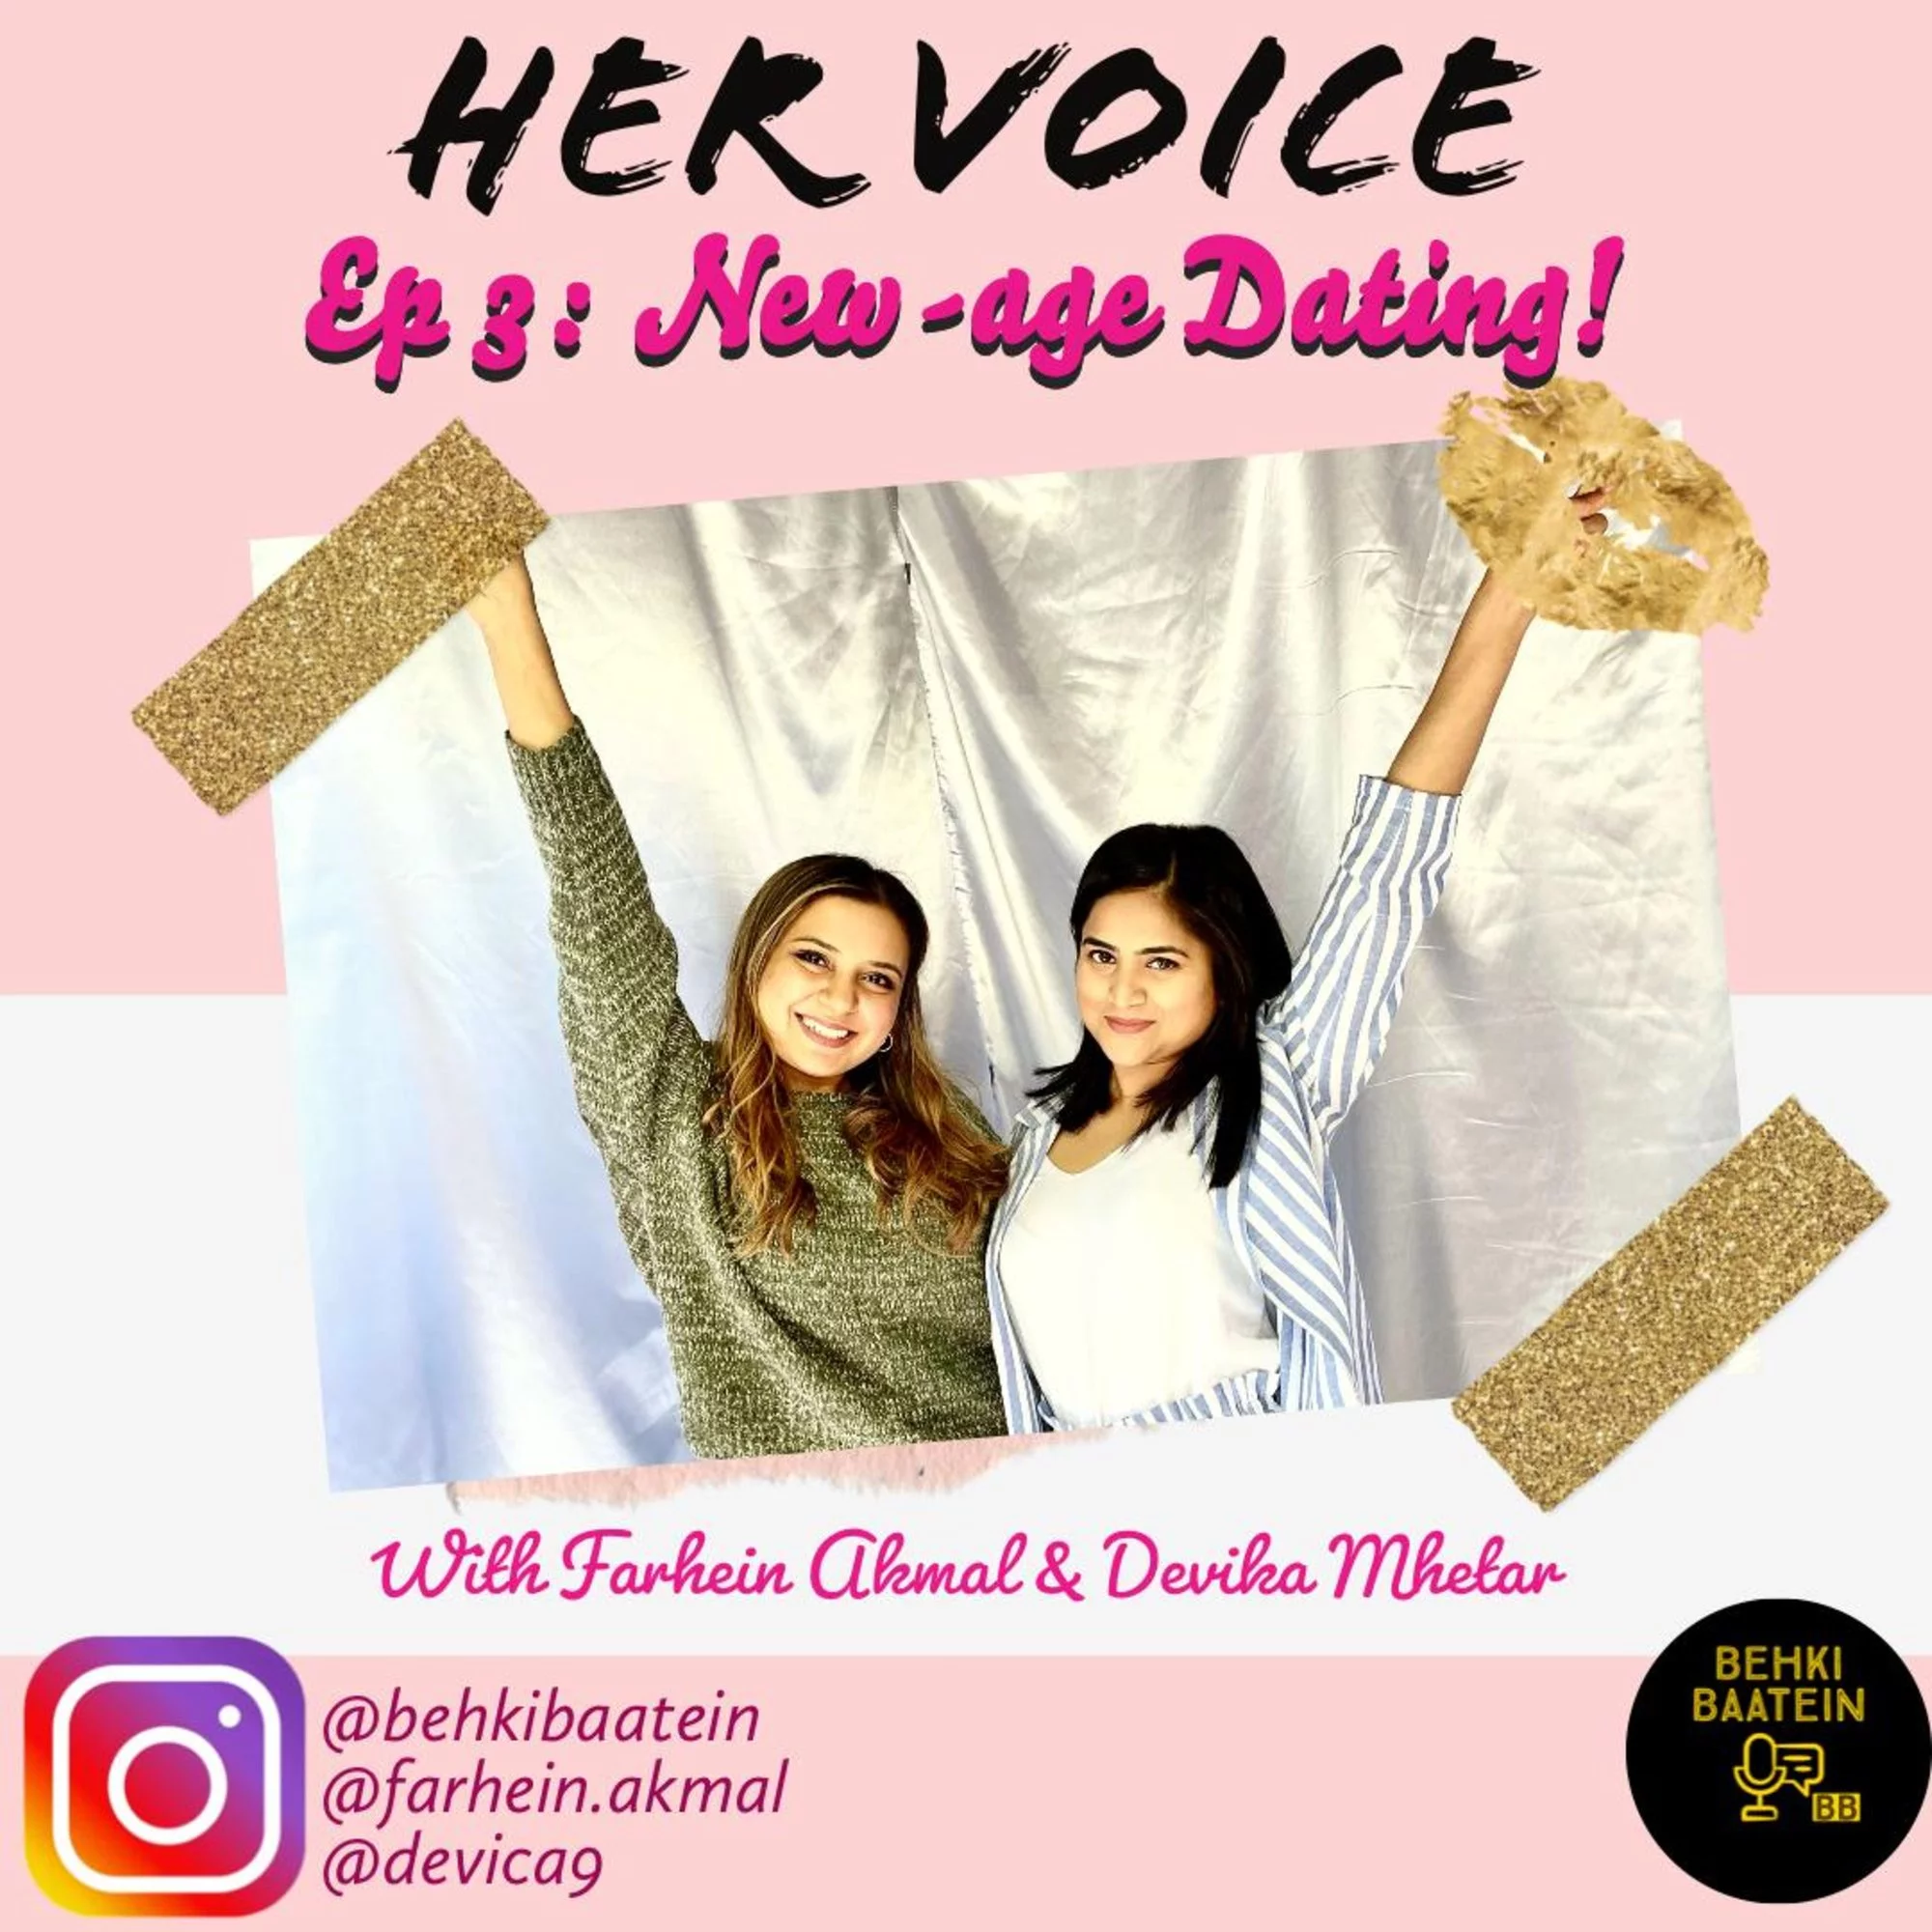 Her Voice - Ep 3: New-age Dating with Farhein Akmal and Devika Mhetar | 